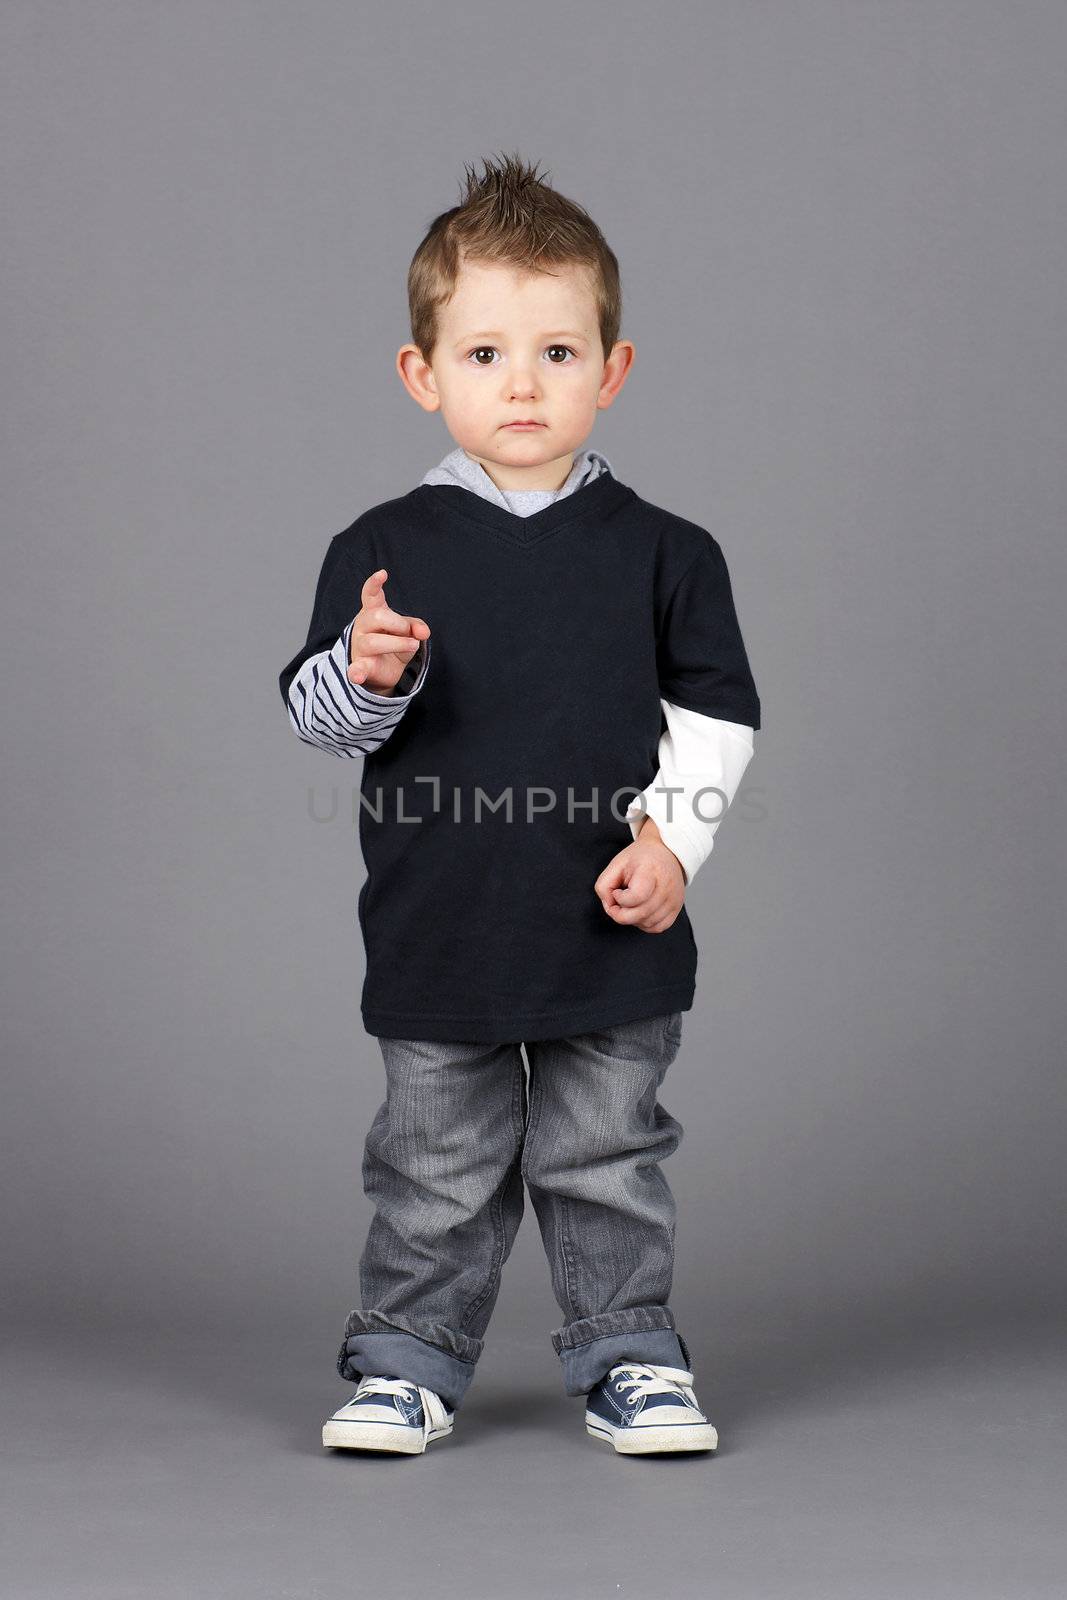 Cute and hip little toddler boy pointing at camera with a serious look on his face over grey background with white speech bubble easy to remove.